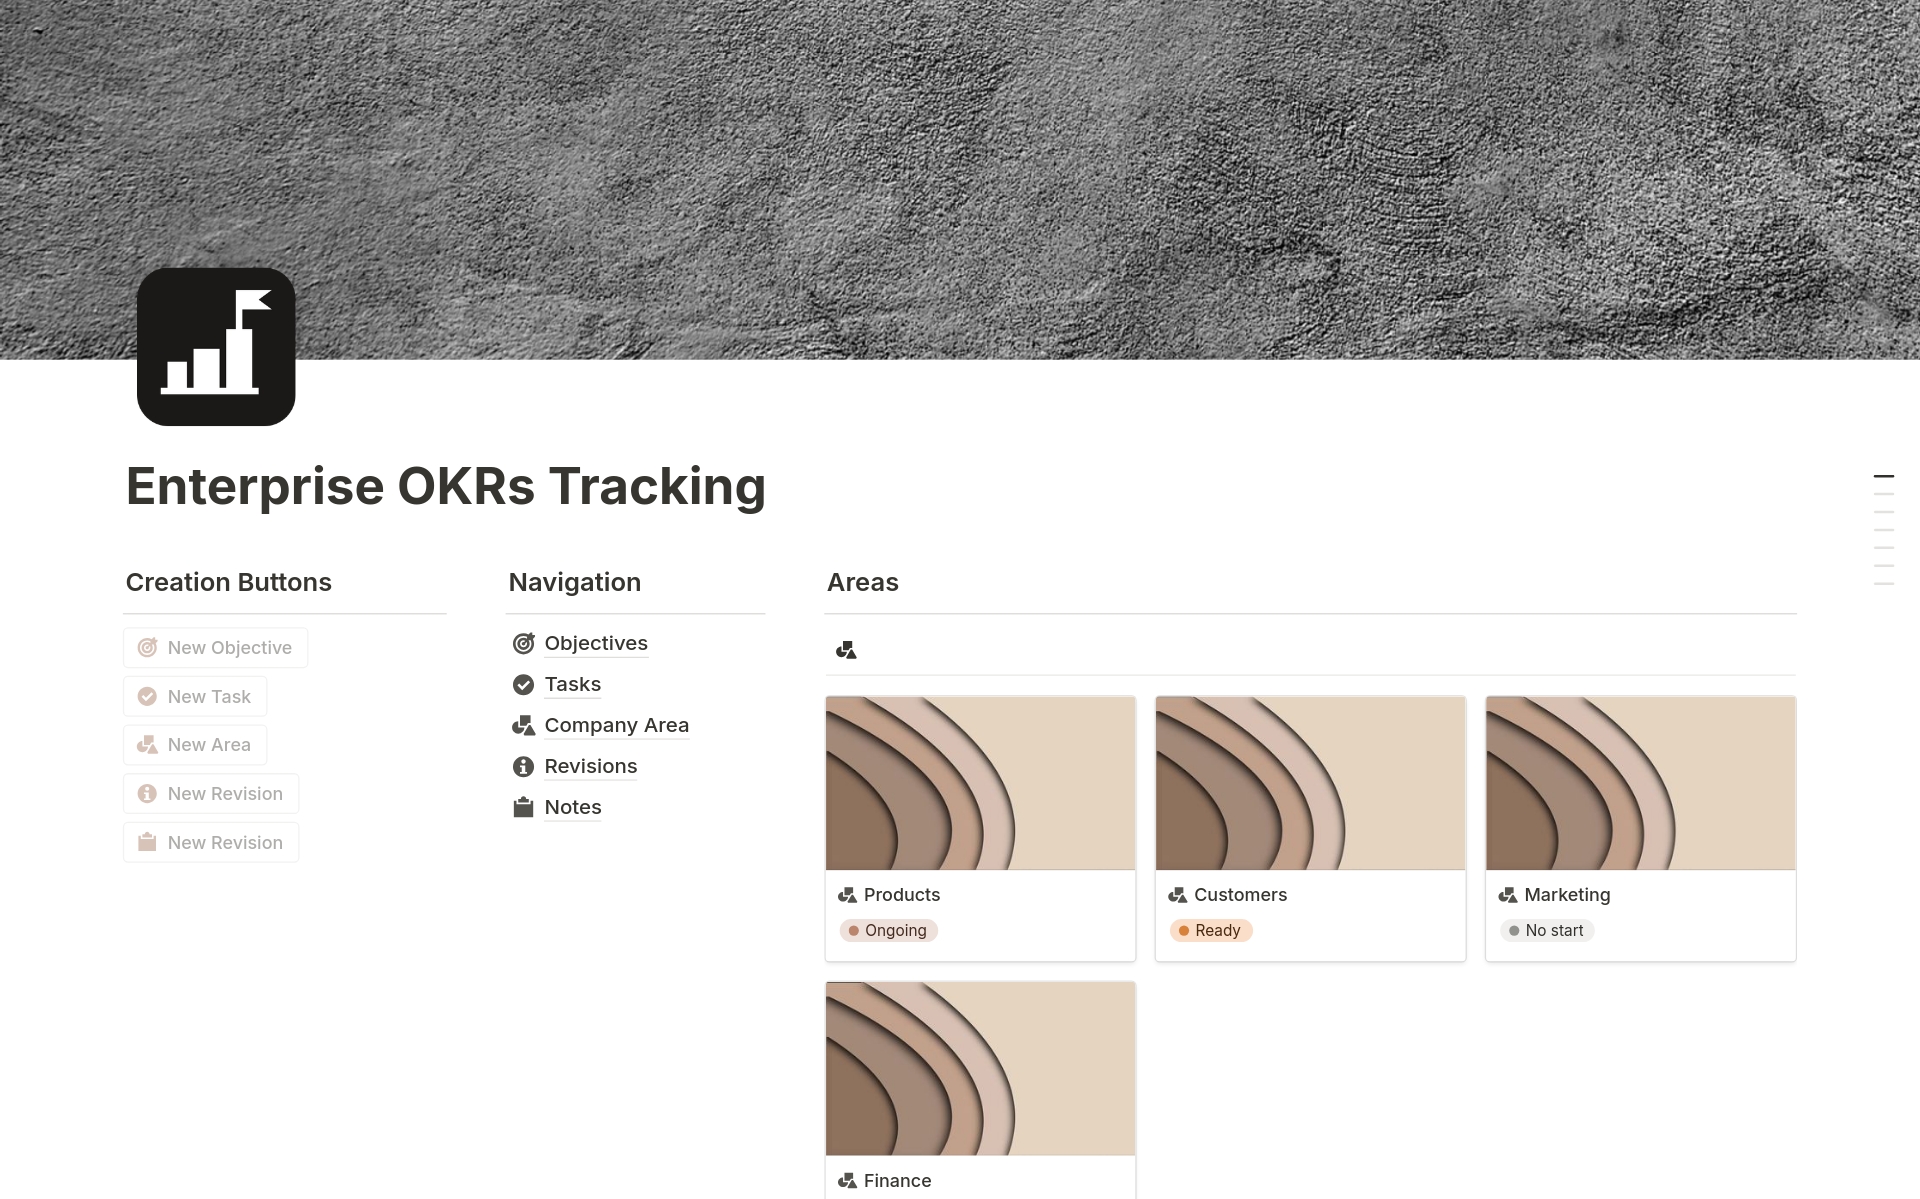 Align your objectives and key results with the OKR Tracking template in Notion. Ideal for measuring progress and achieving goals.